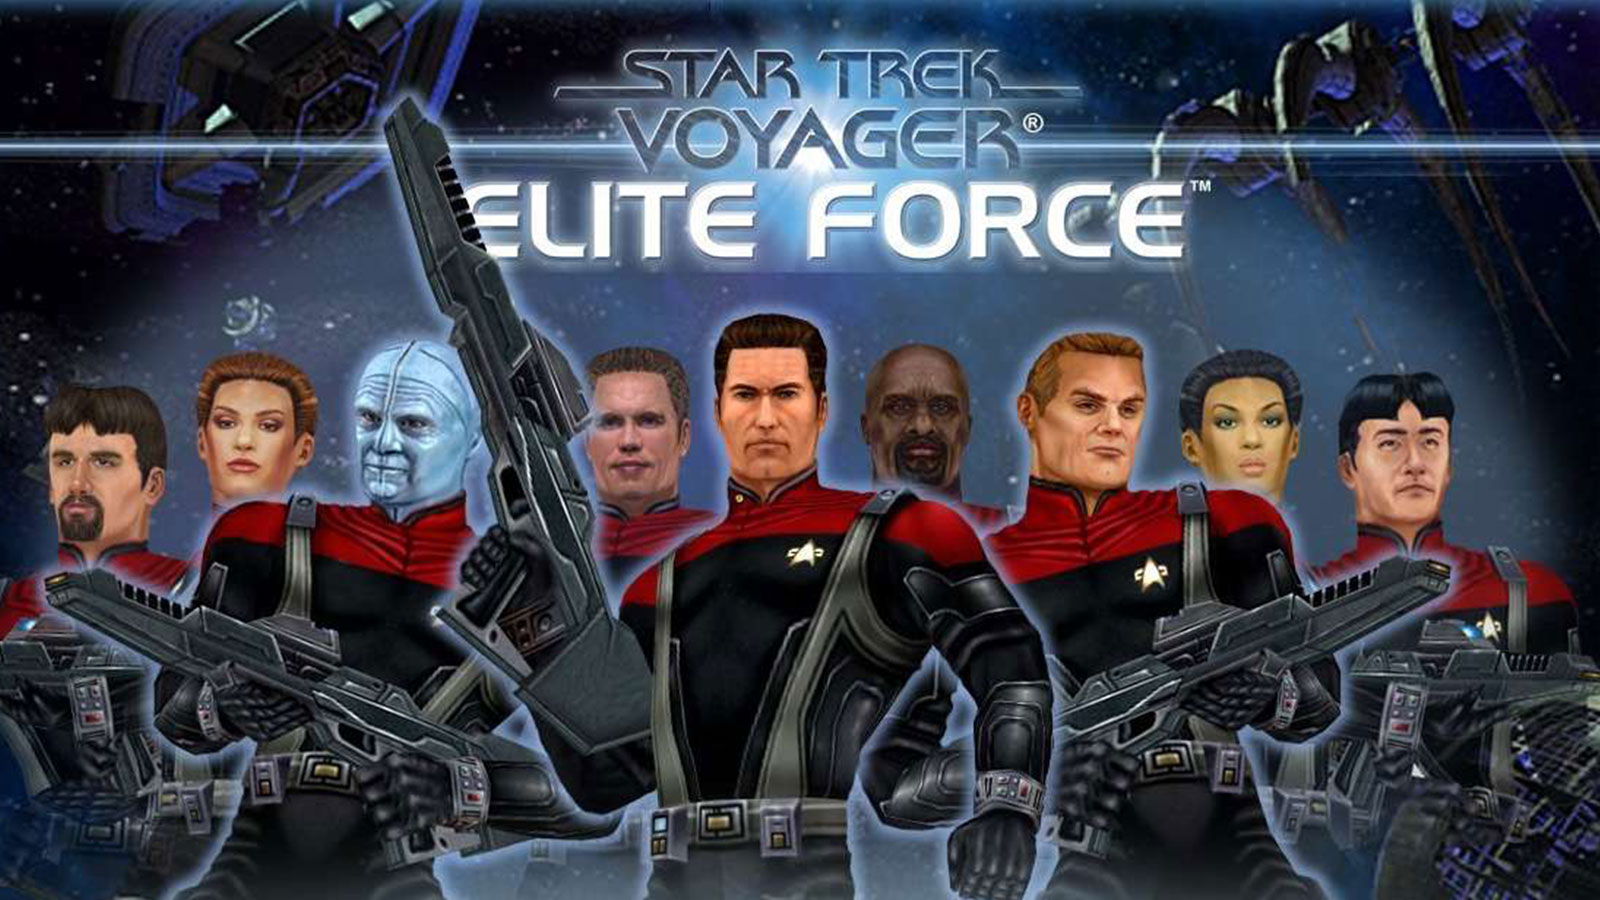 Voyager: Elite Force Boldly Went Where No Star Trek Game Had Gone Before. Here’s Why